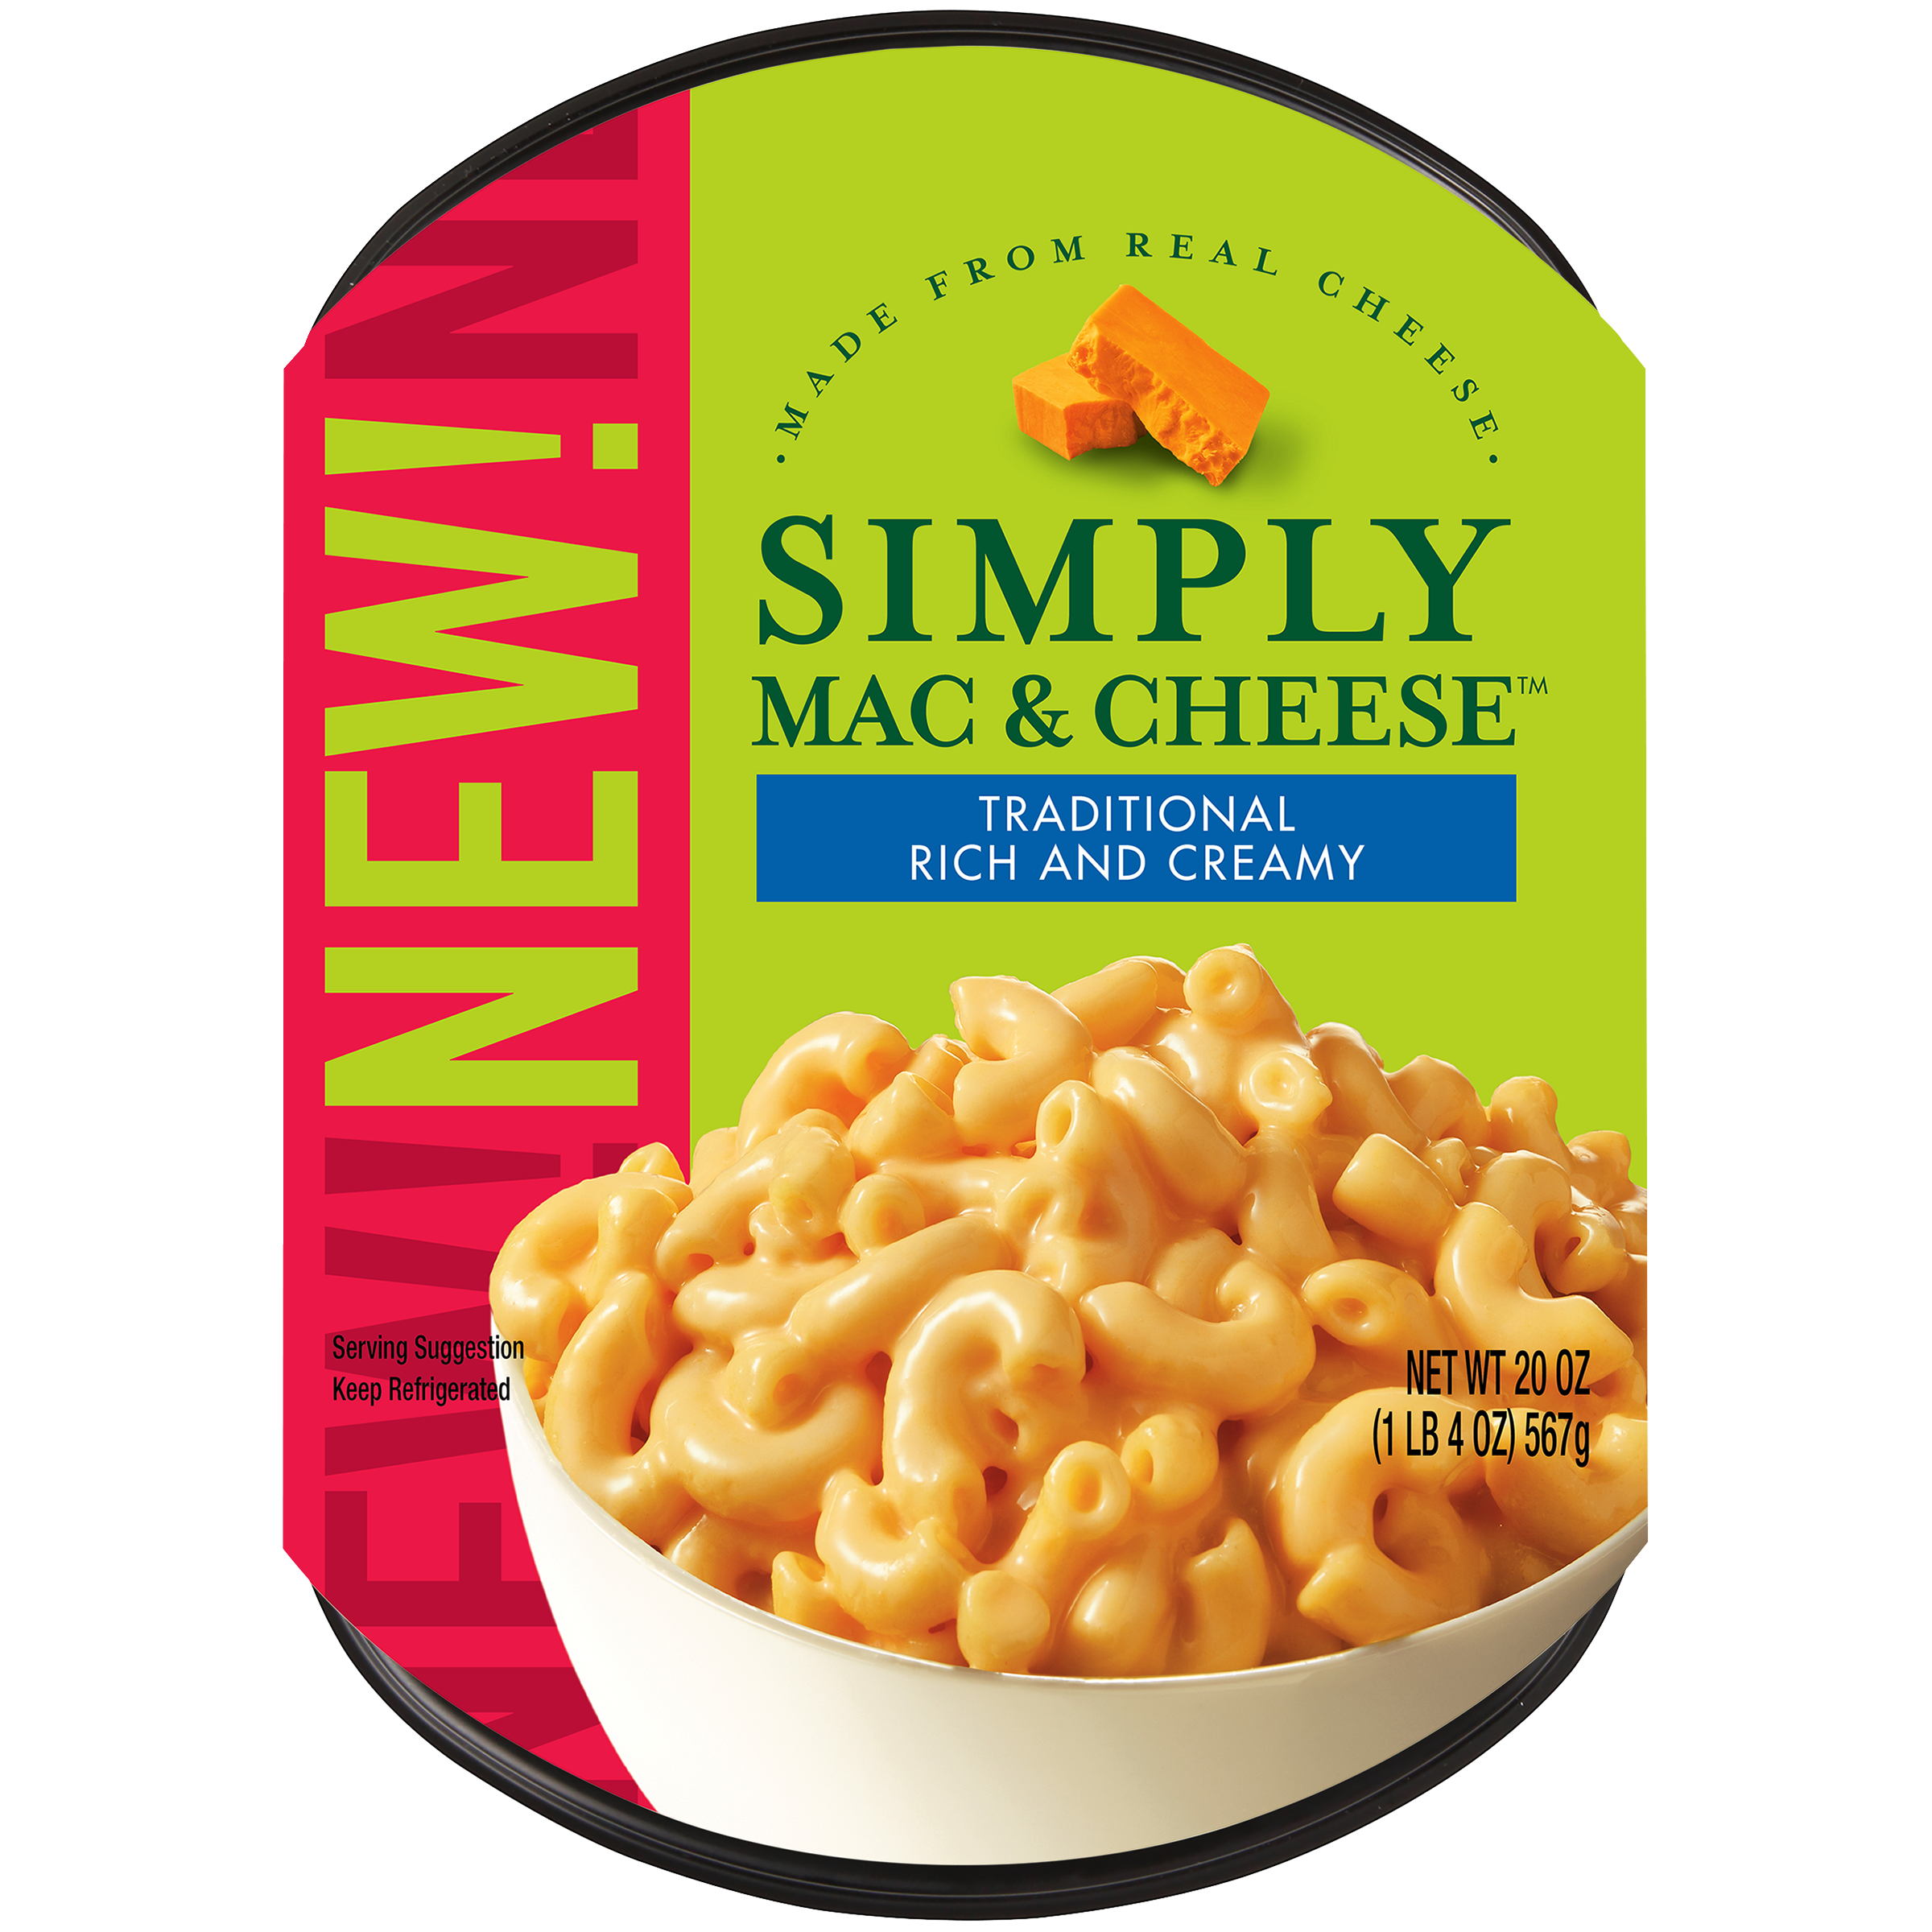 Simply Mac & Cheese product image